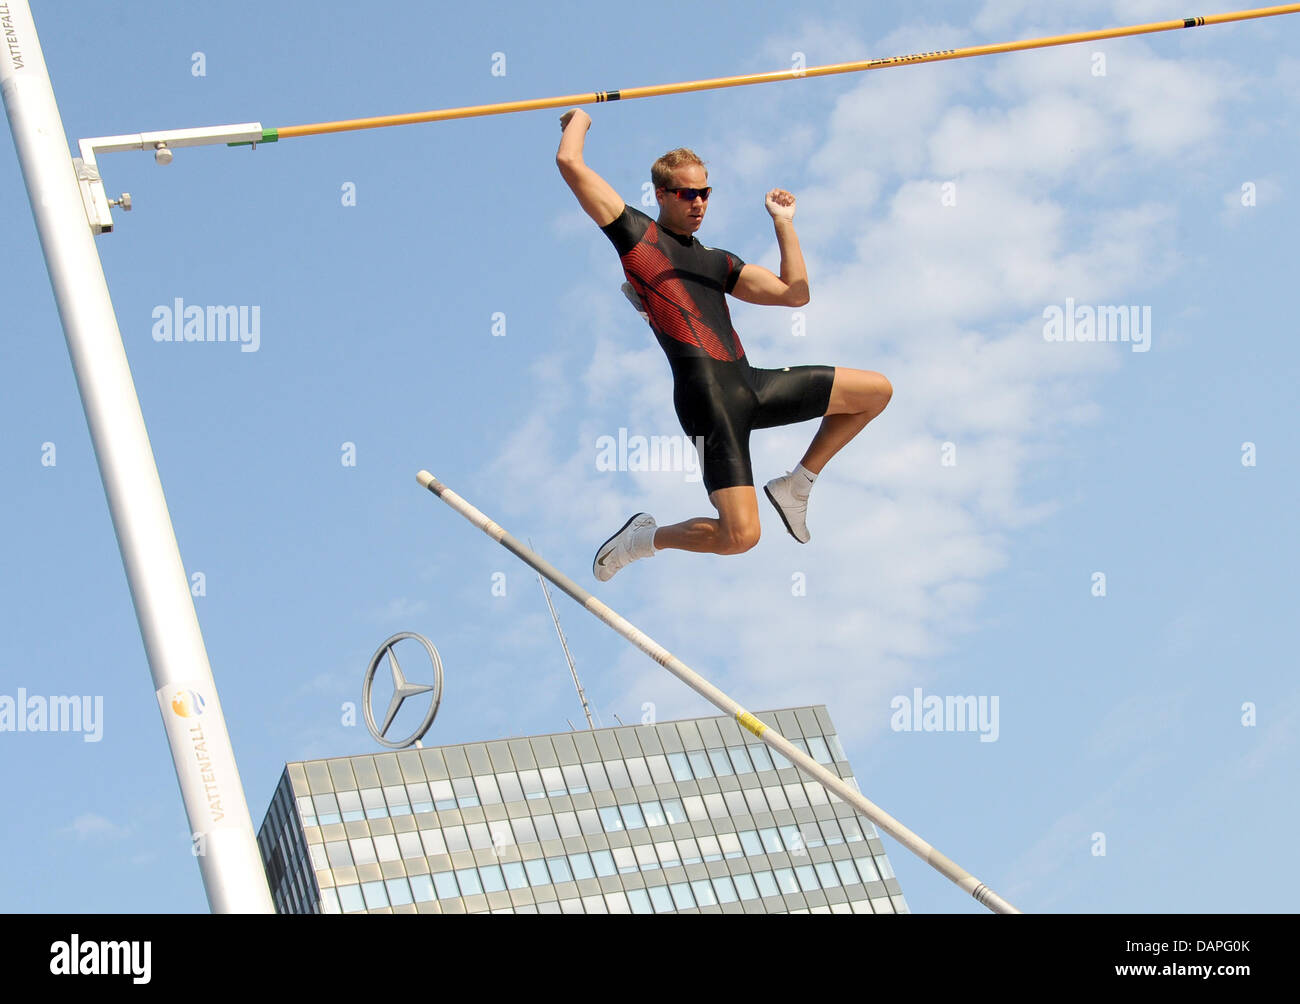 Wout van Wengerden jumps over a bar during a pole vault event on Breitscheidplatz Square in Berlin, Germany, 18 August 2011. The pole vault event was organised as publicity for the Istaf on 11 September 2011. Photo: Britta Pedersen Stock Photo